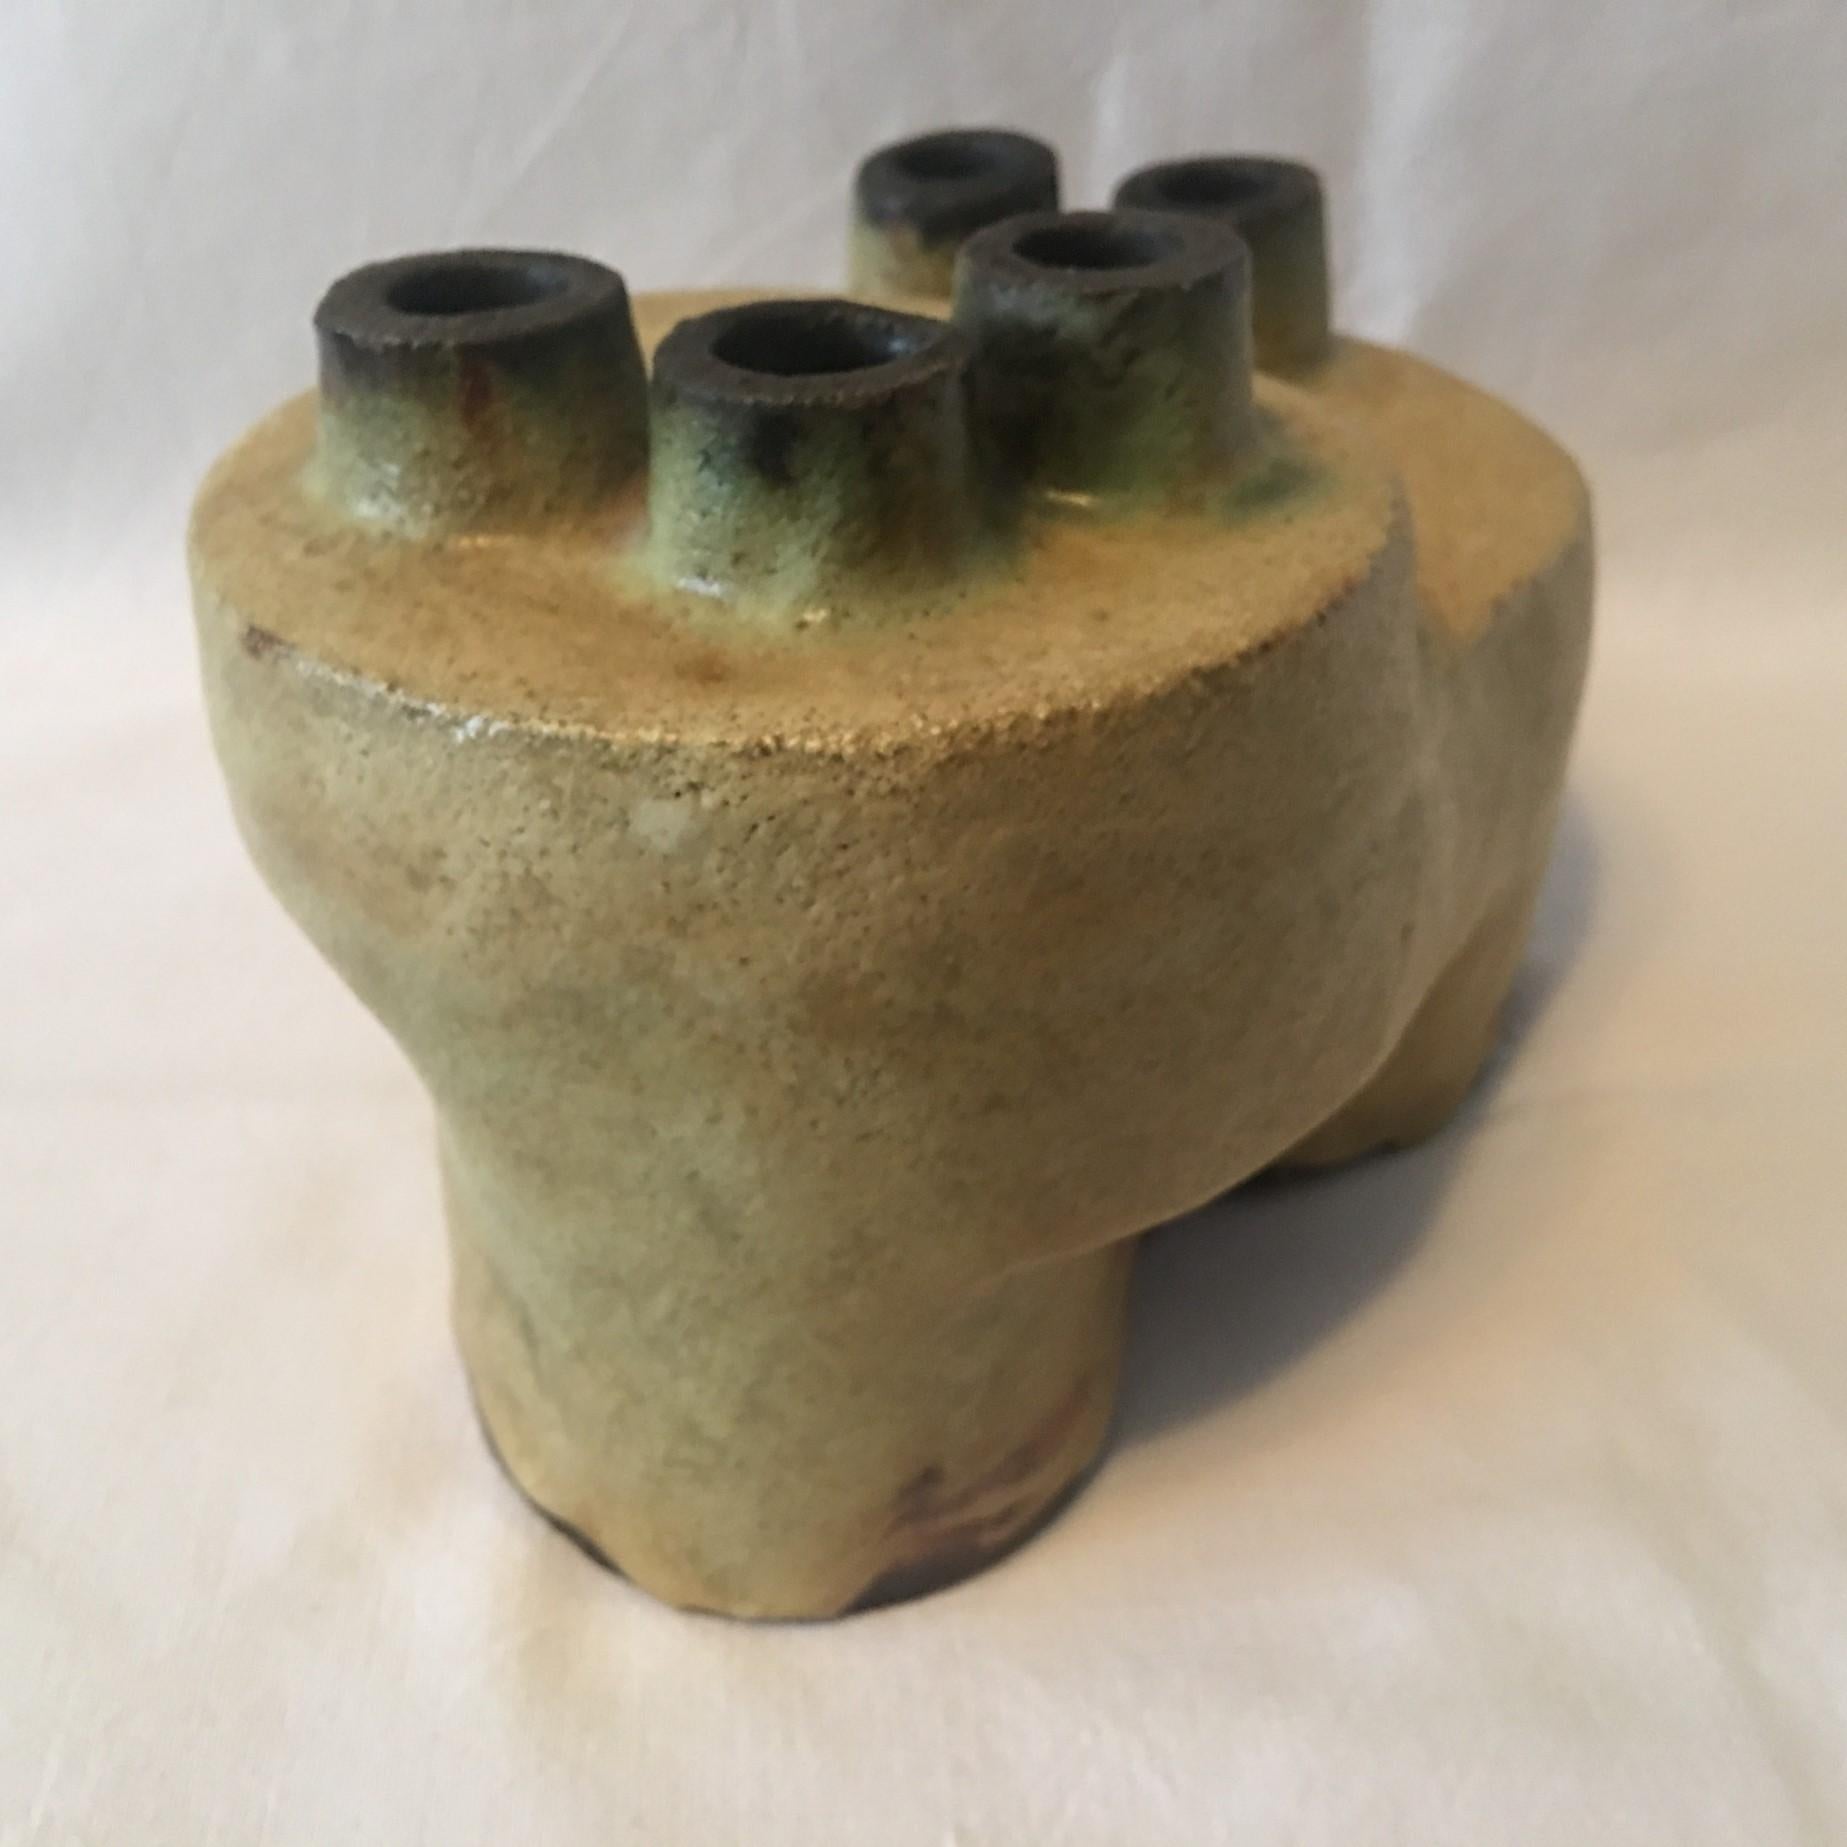 Five Tubes Ceramic Object Vase by Helmut Schaffenacker of Ulm Germany In Good Condition For Sale In Frisco, TX